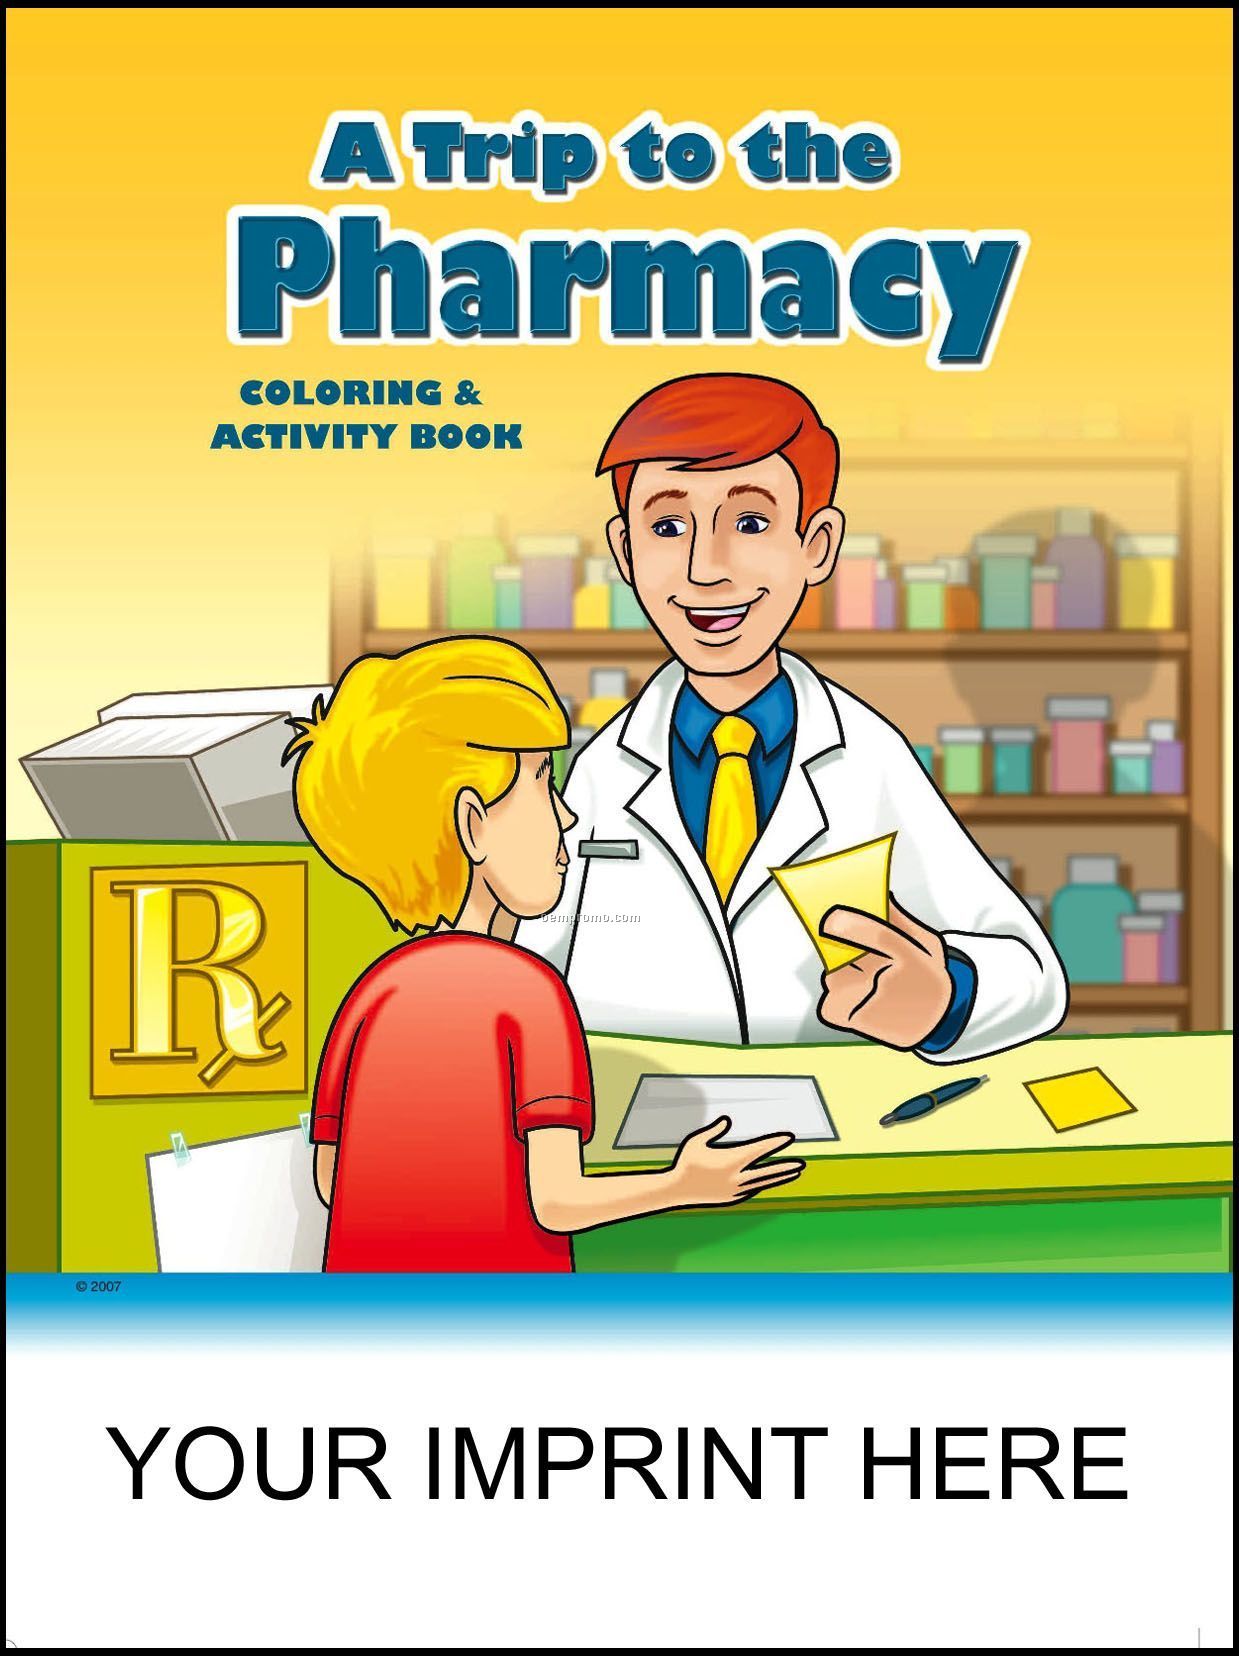 A Trip To The Pharmacy Coloring & Activity Book